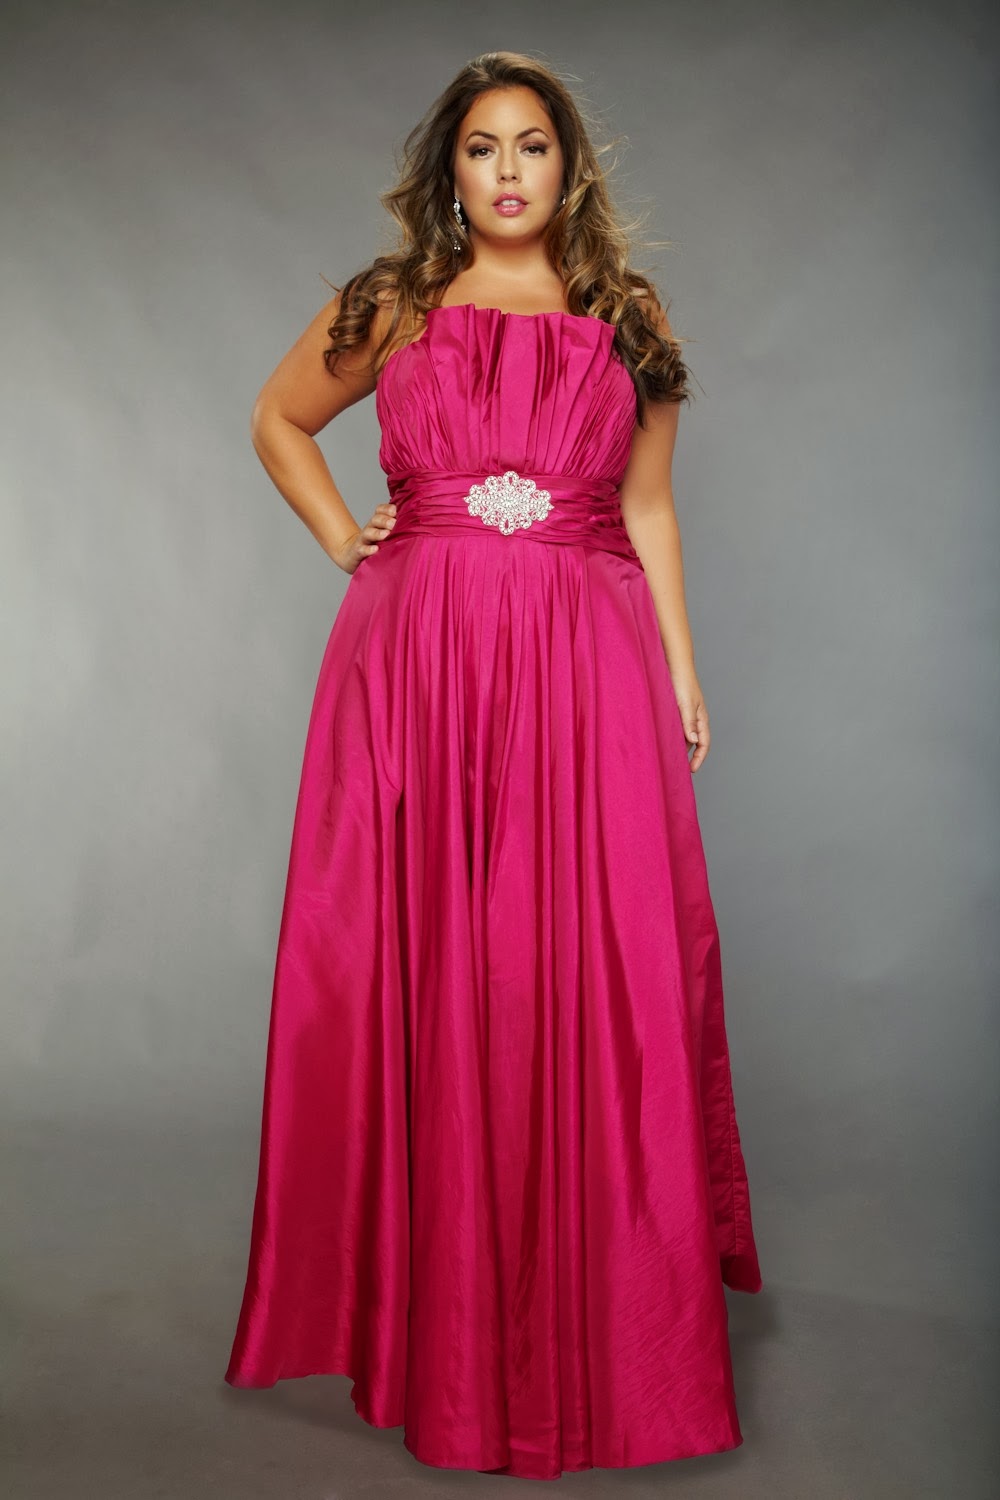 Hot Trend : Strapless Plus Size Prom Dresses | Prom Dresses Gowns Fashion